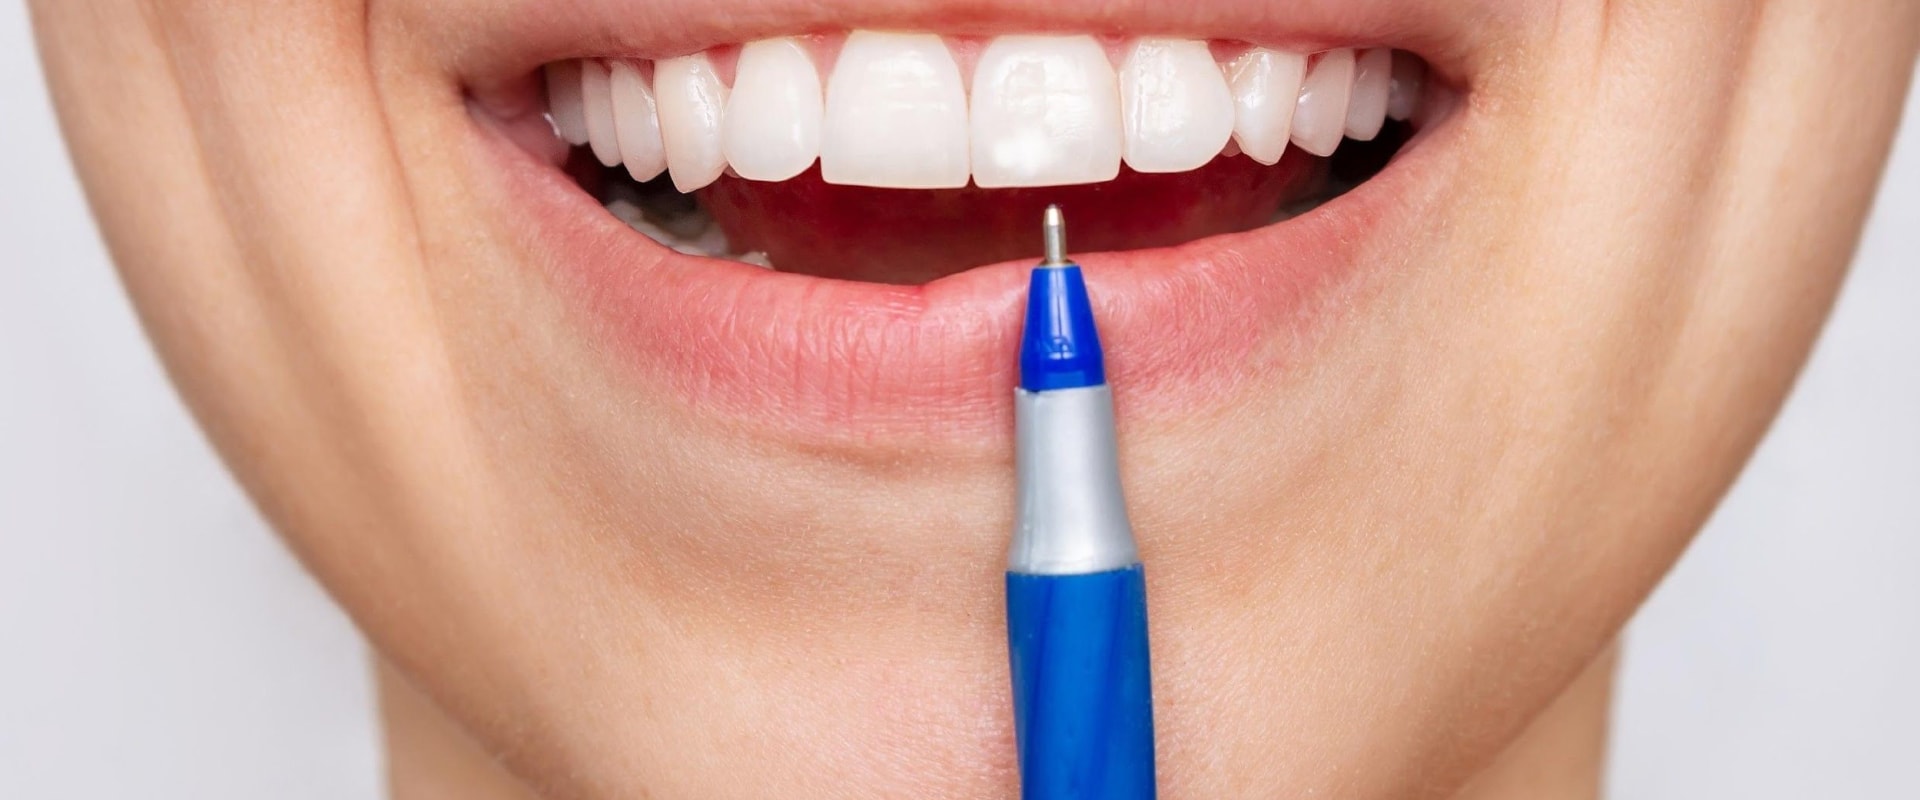 Whitening Pens: Tips for Using Teeth Whitening Products